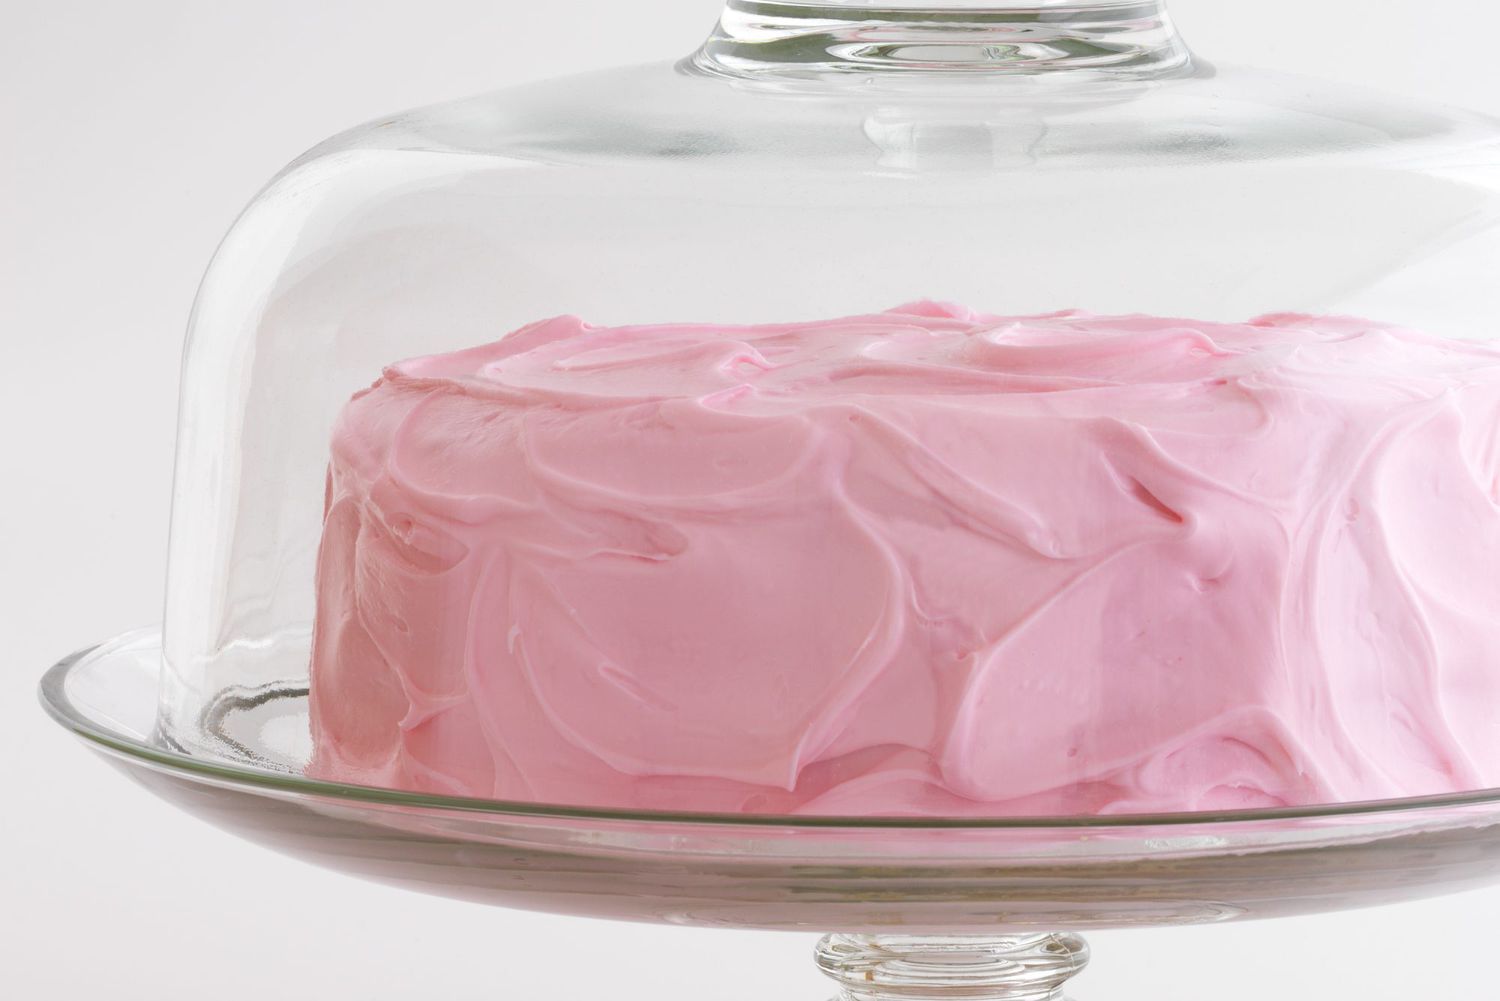 pink frosted cake in glass cake cover